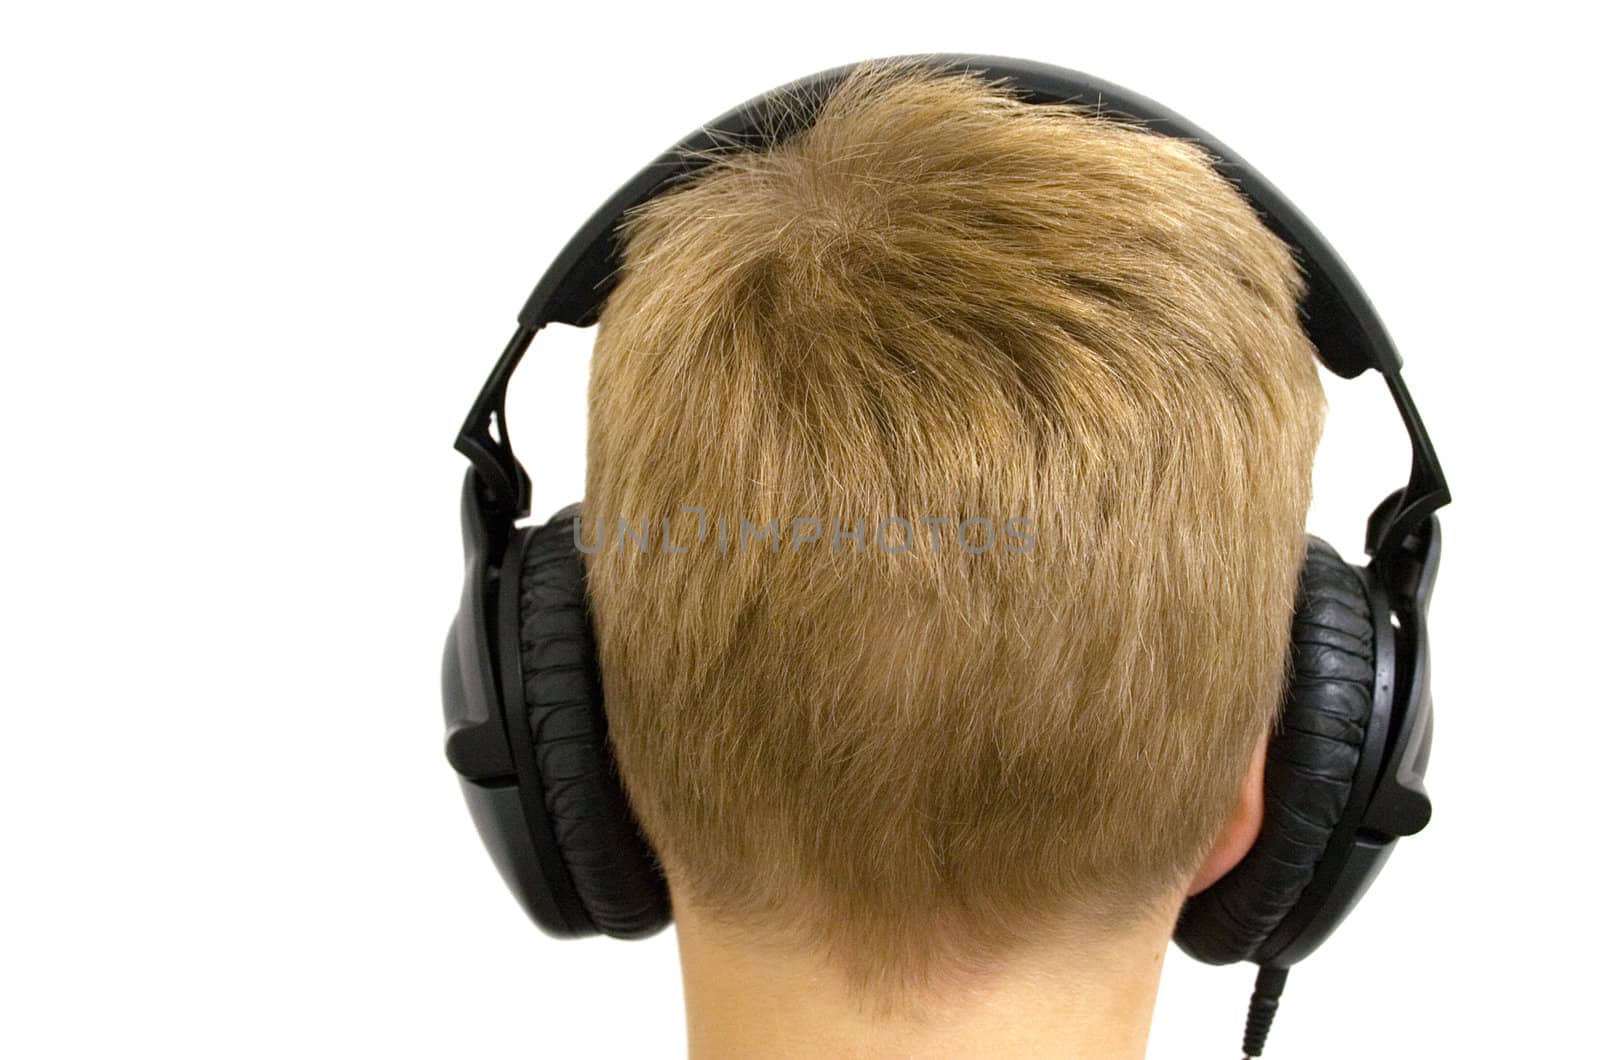 Boy with Headphones by winterling